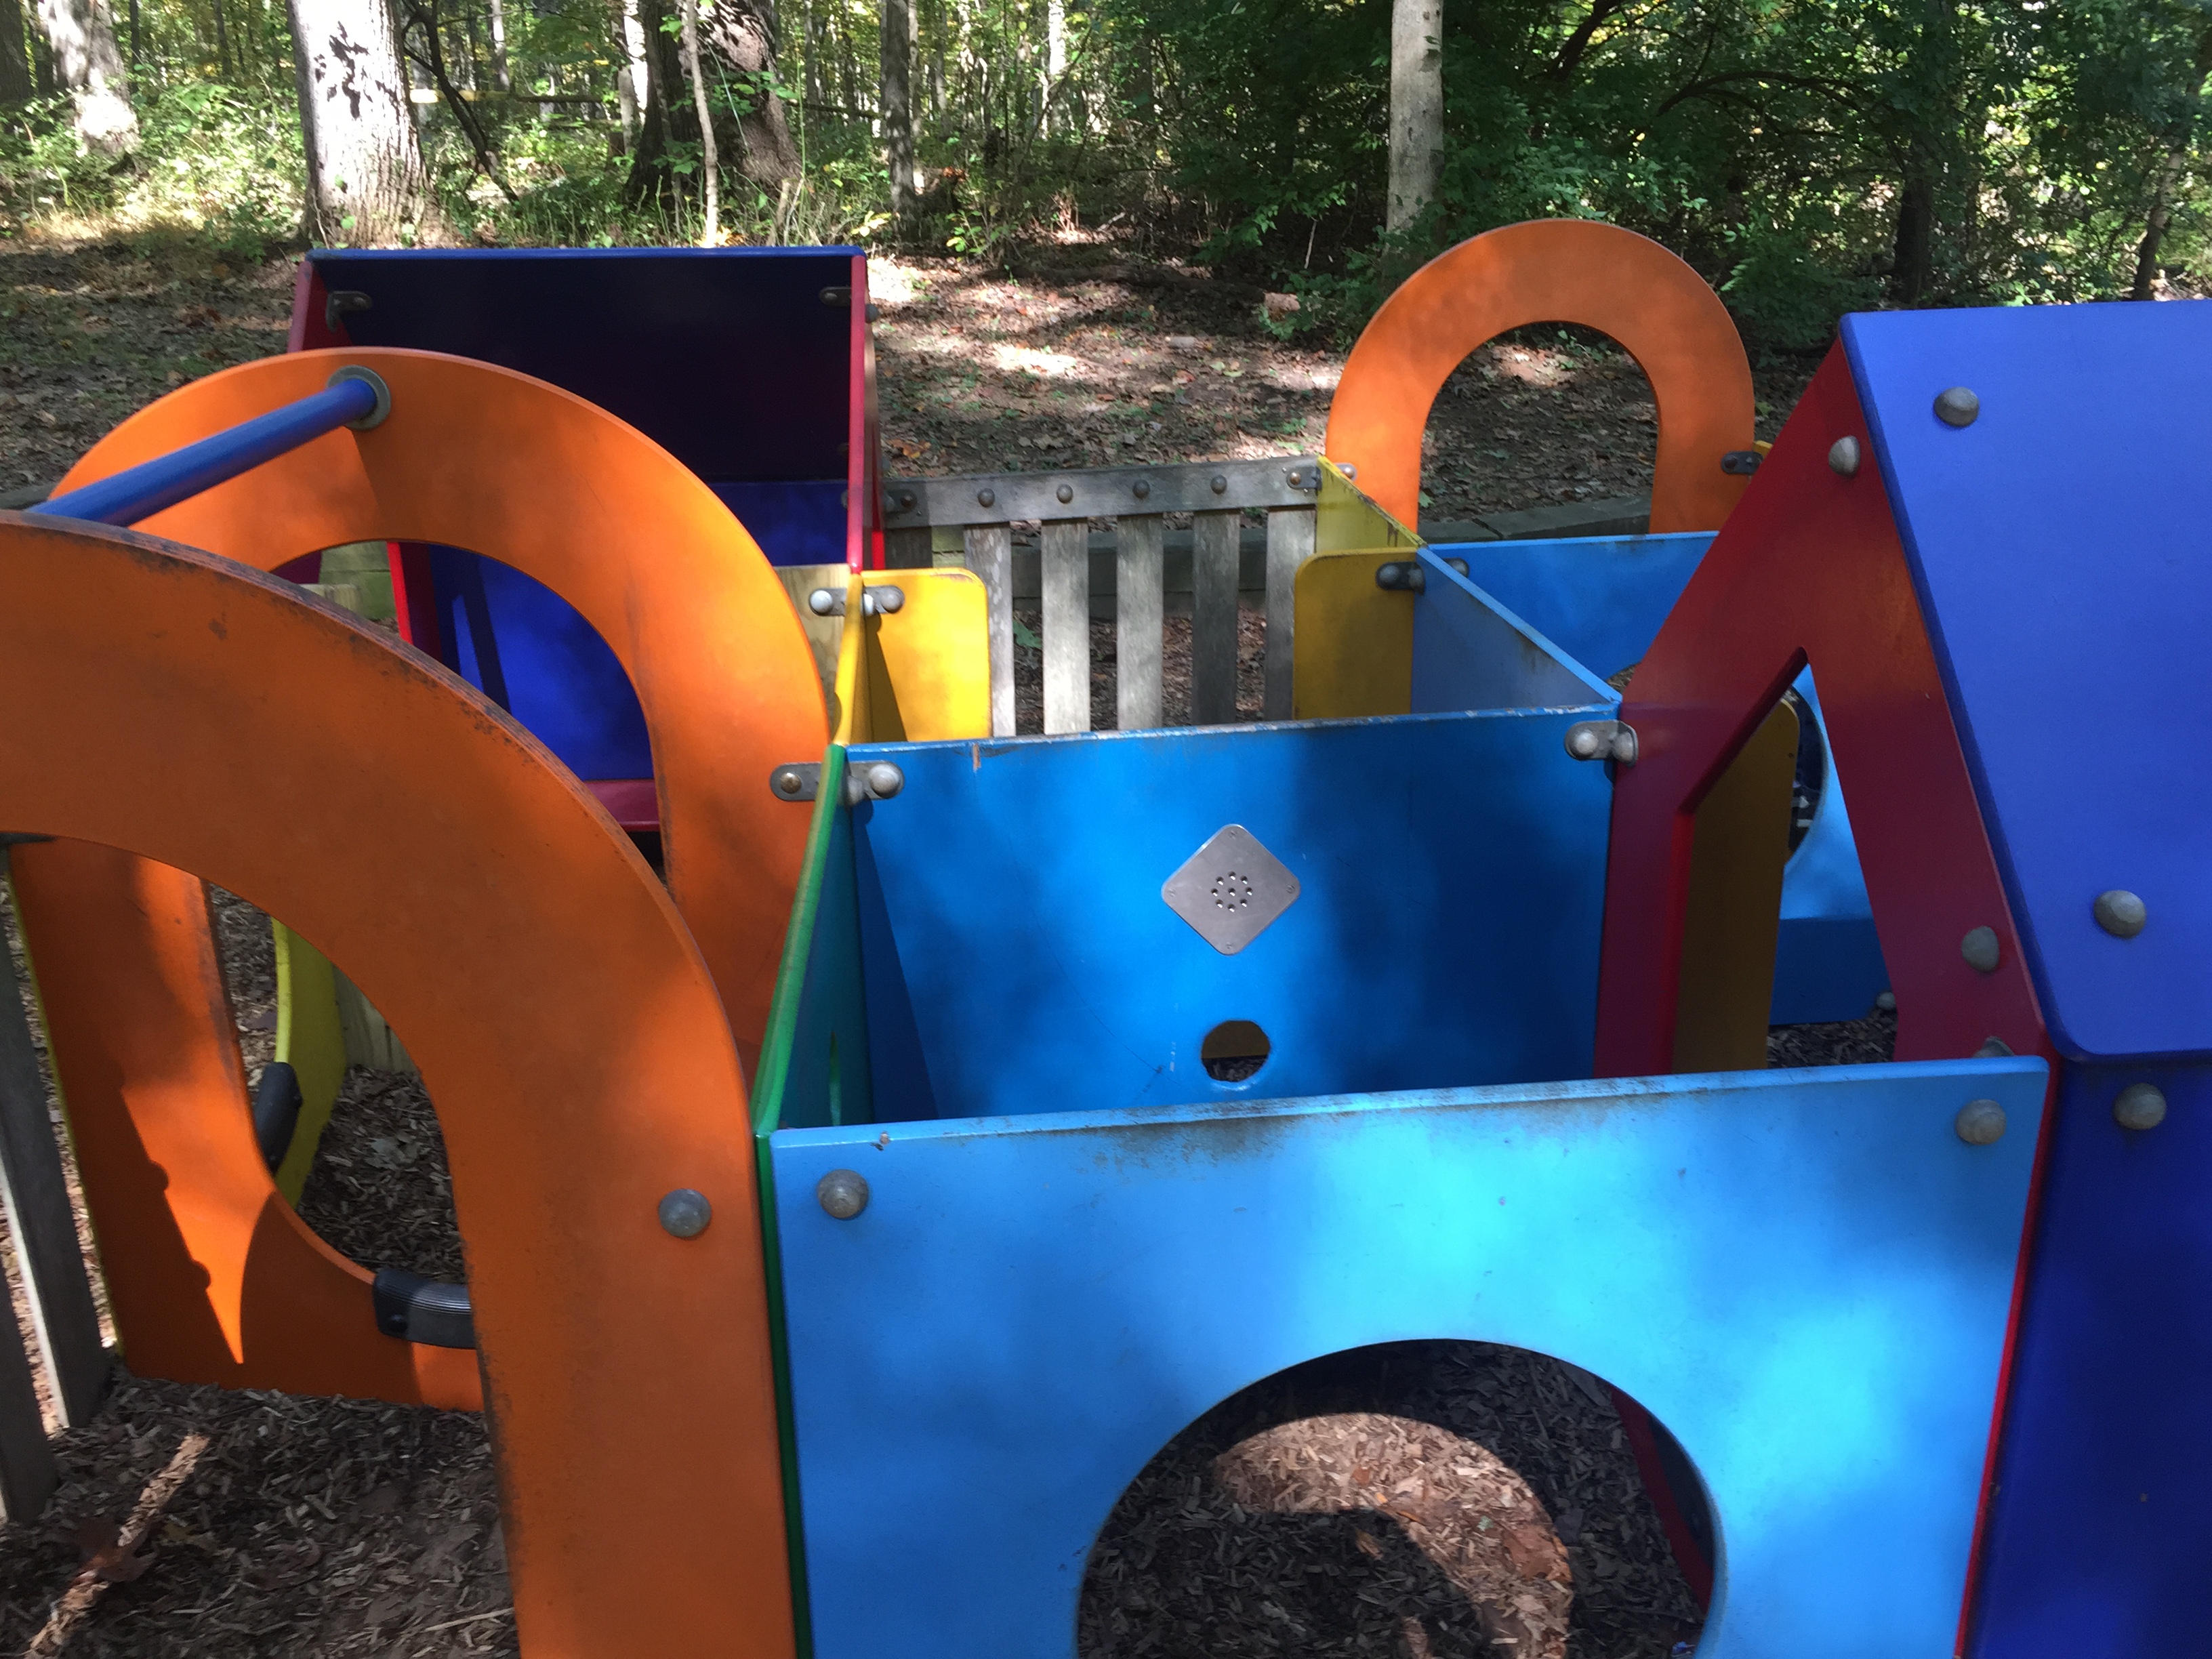 Multi-colored play house at Cabin John park with multiple rooms that kids can crawl between.